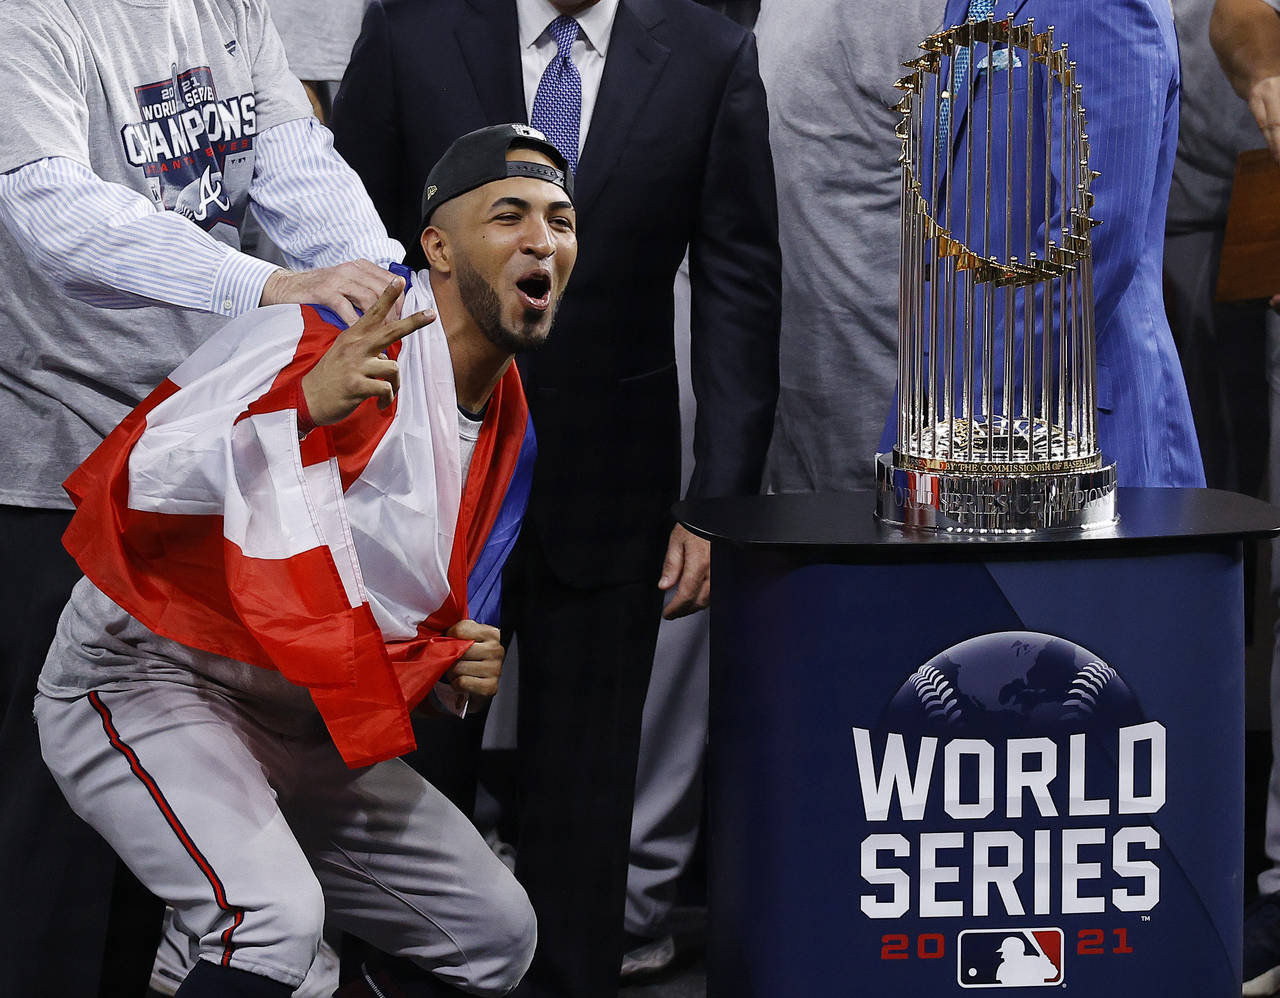 Atlanta Braves left fielder Eddie Rosario stands next to the trophy after the team's win in the Wor...